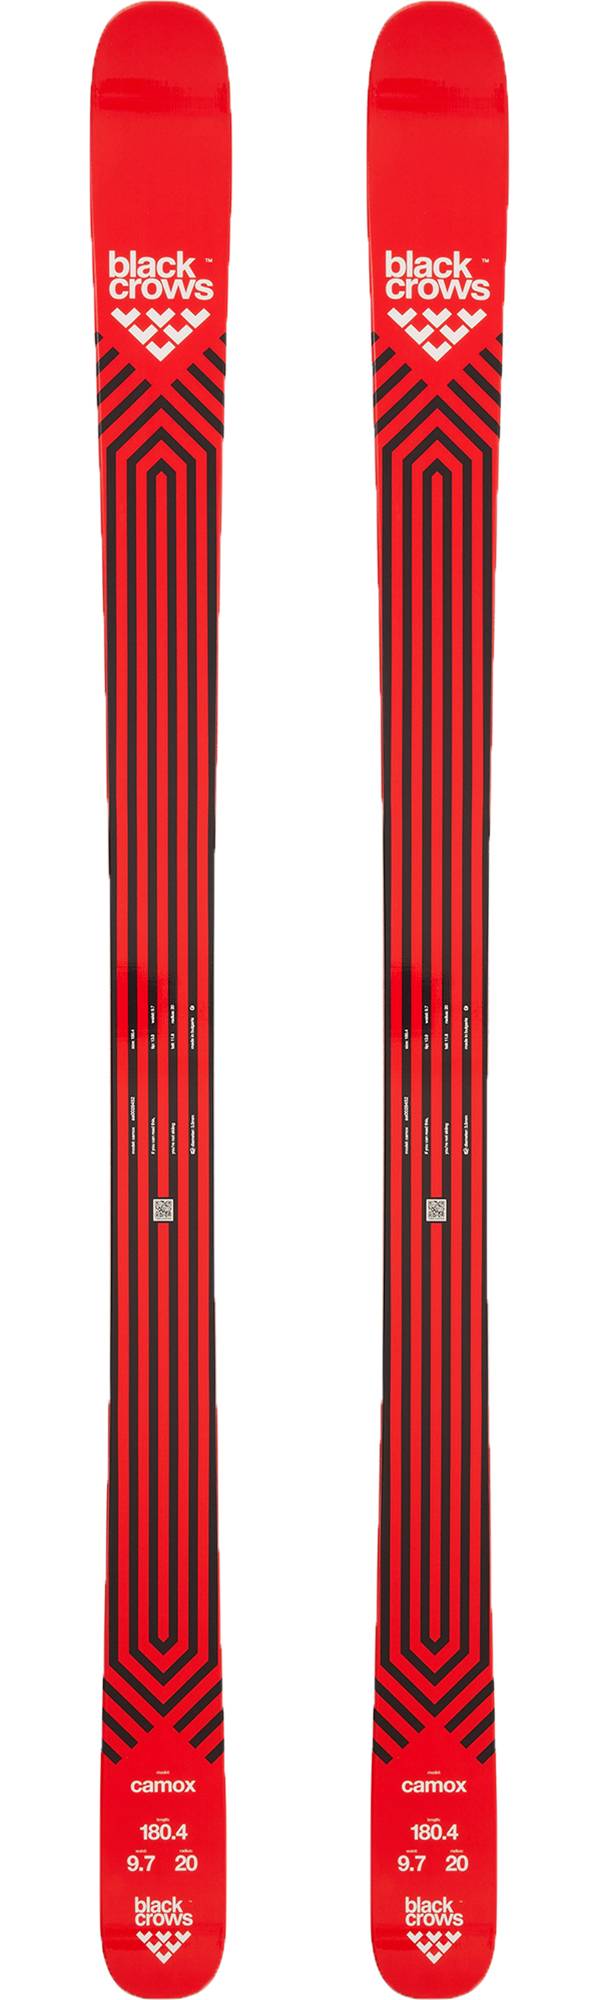 black crows '21-'22 Camox Skis product image